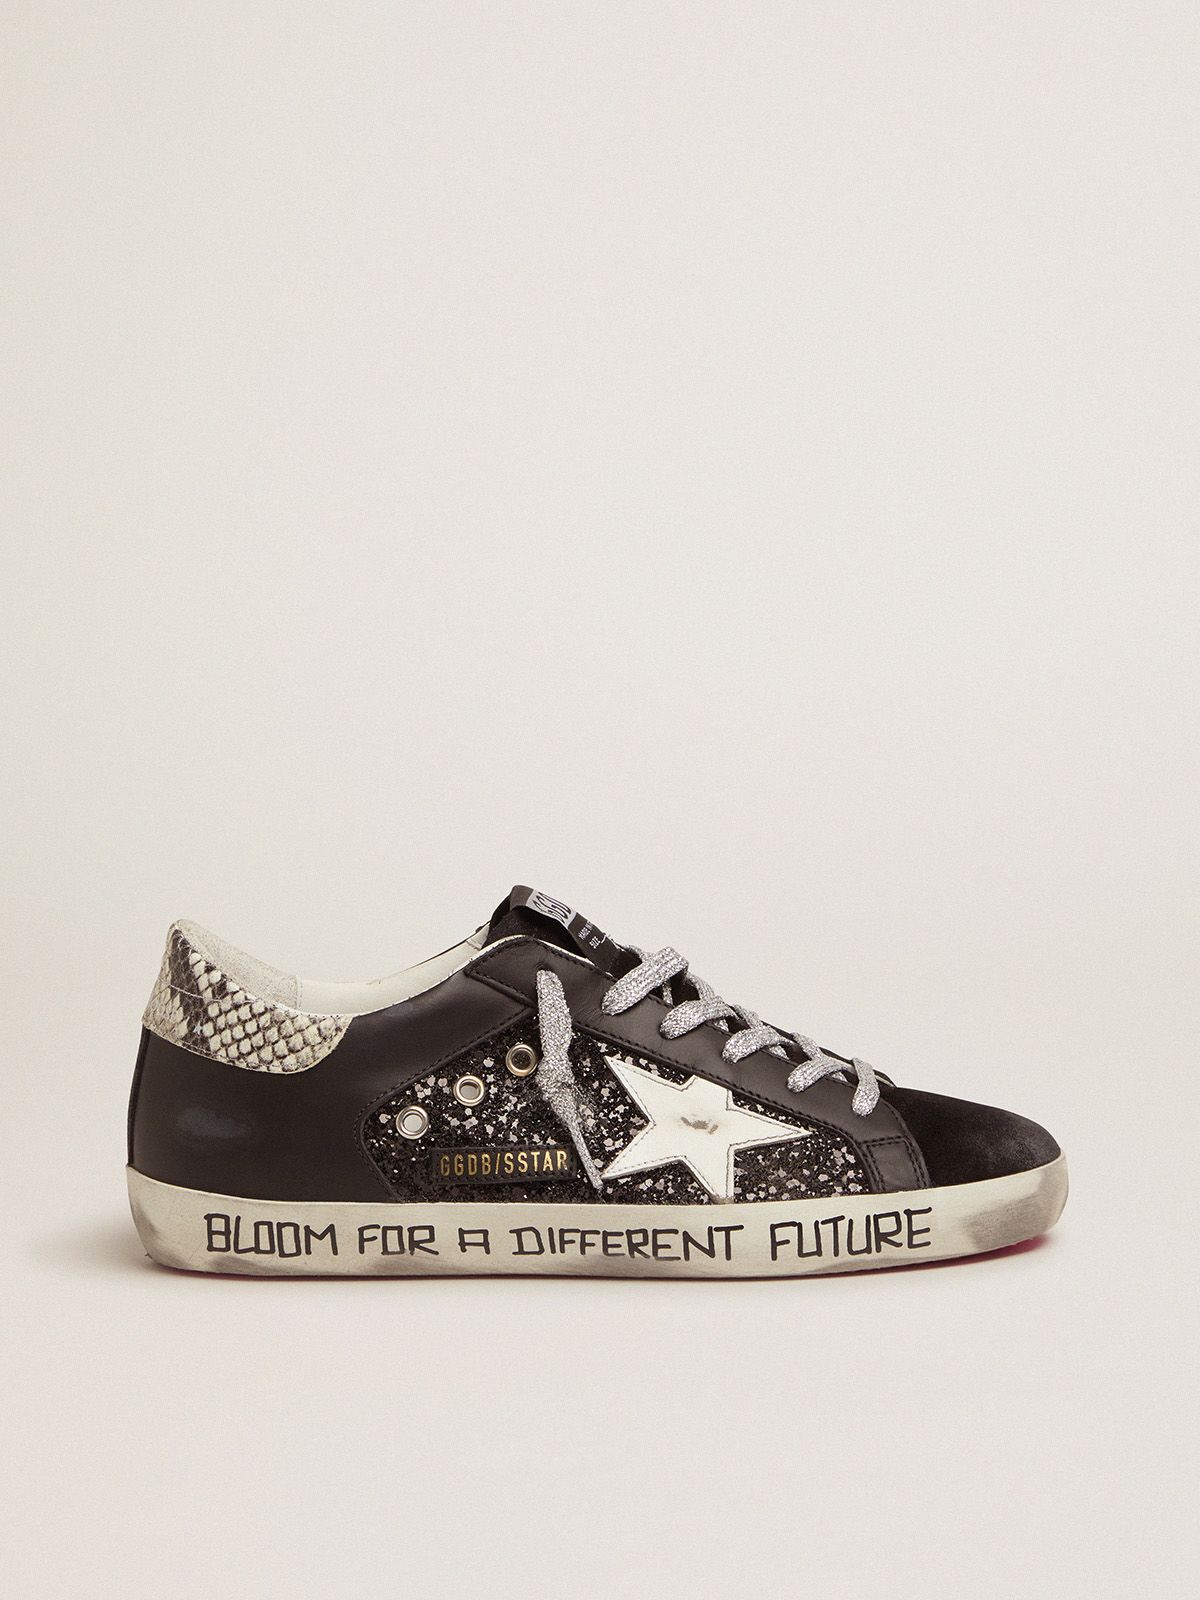 golden goose glitter and lettering Super-Star sneakers handwritten with